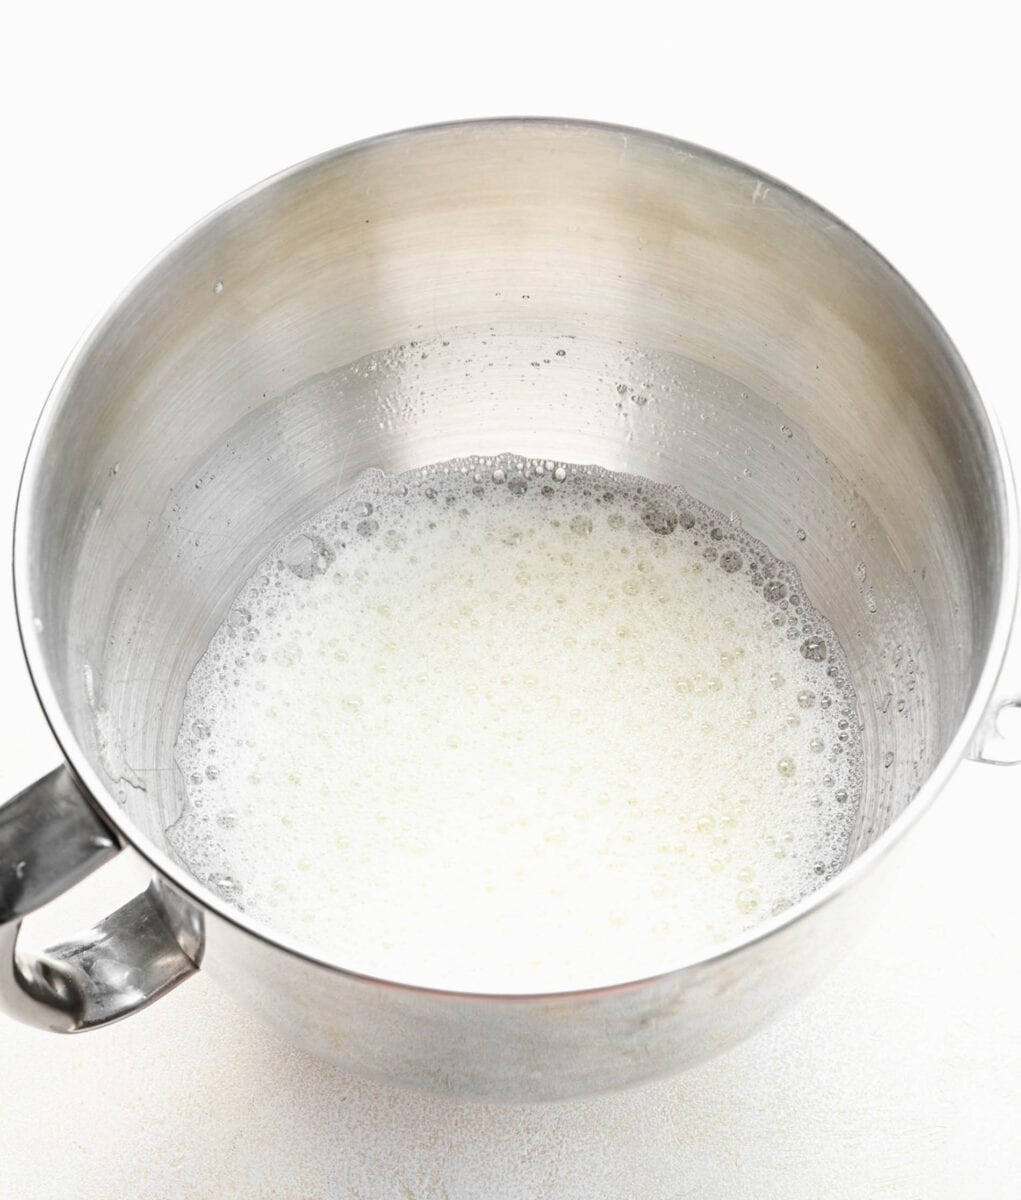 Egg whites whipped to frothy in a mixing bowl.